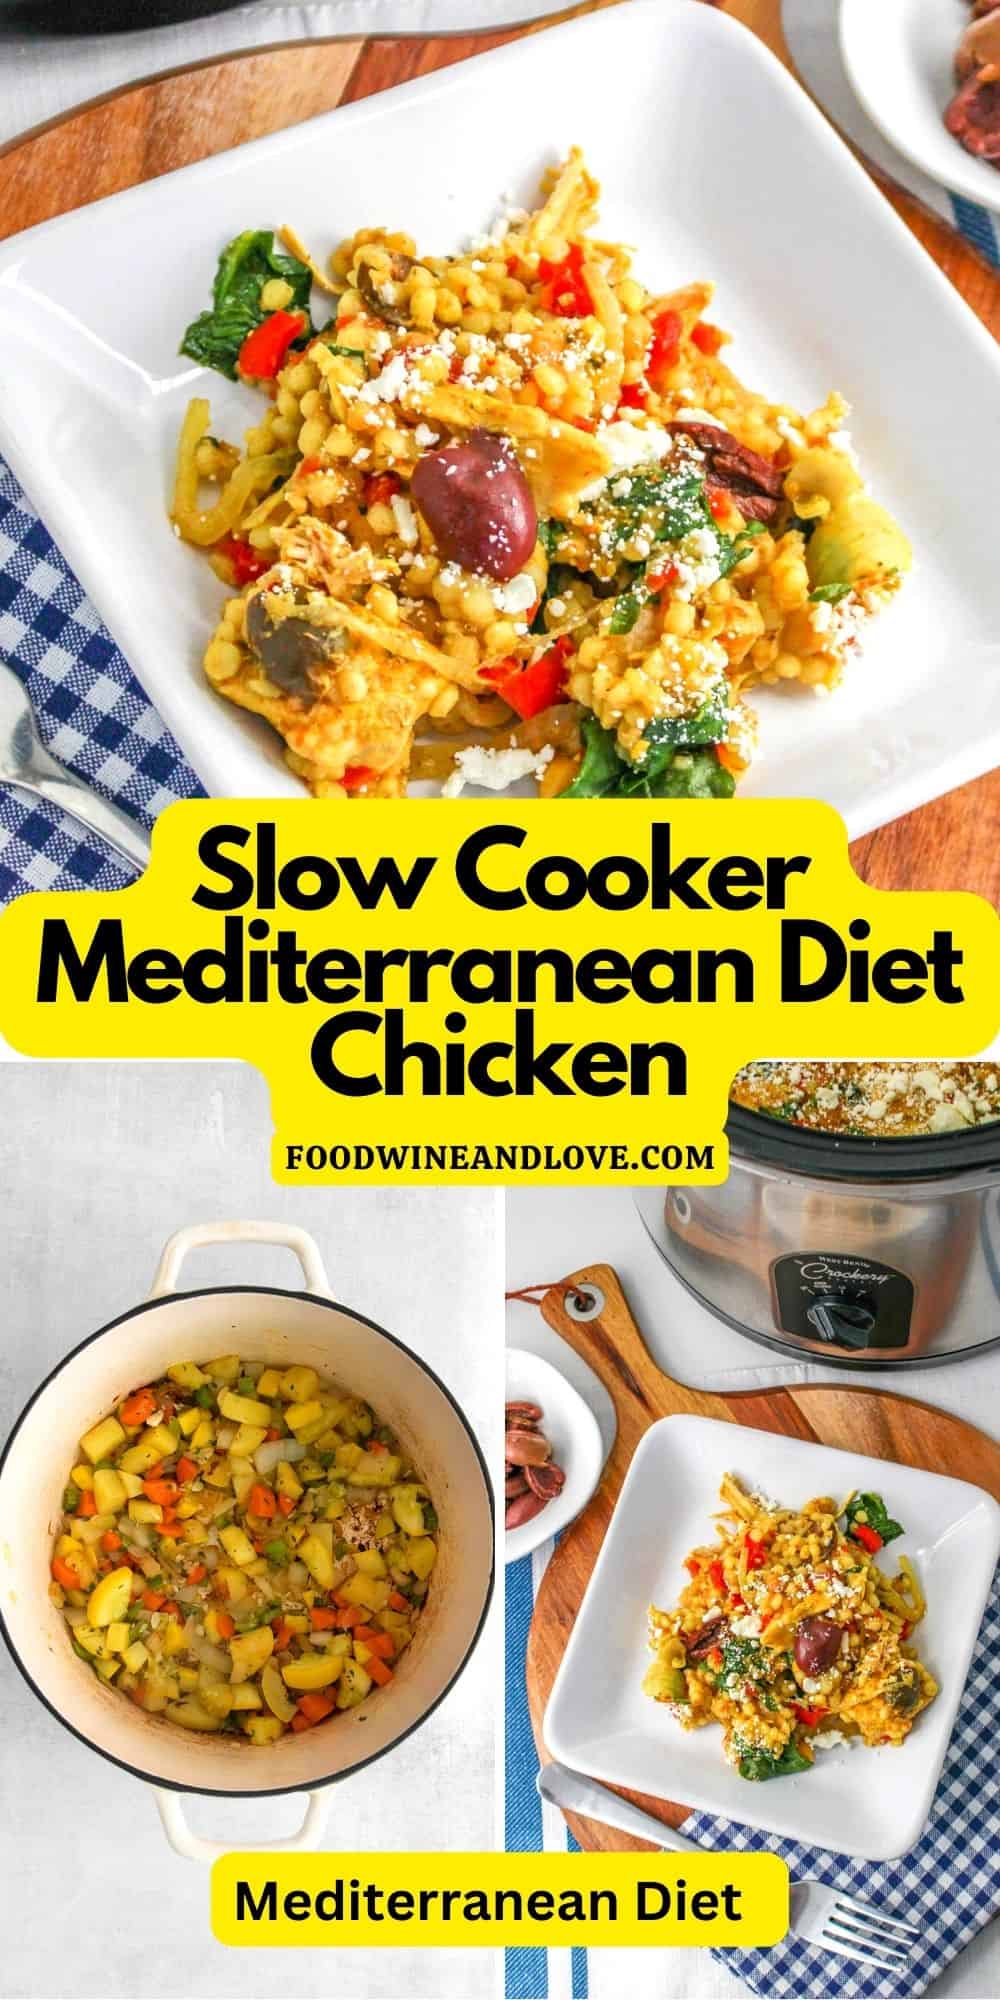 Slow Cooker Mediterranean Diet Chicken, an easy and flavorful meal recipe made with skinless chicken breasts and healthier ingredients.